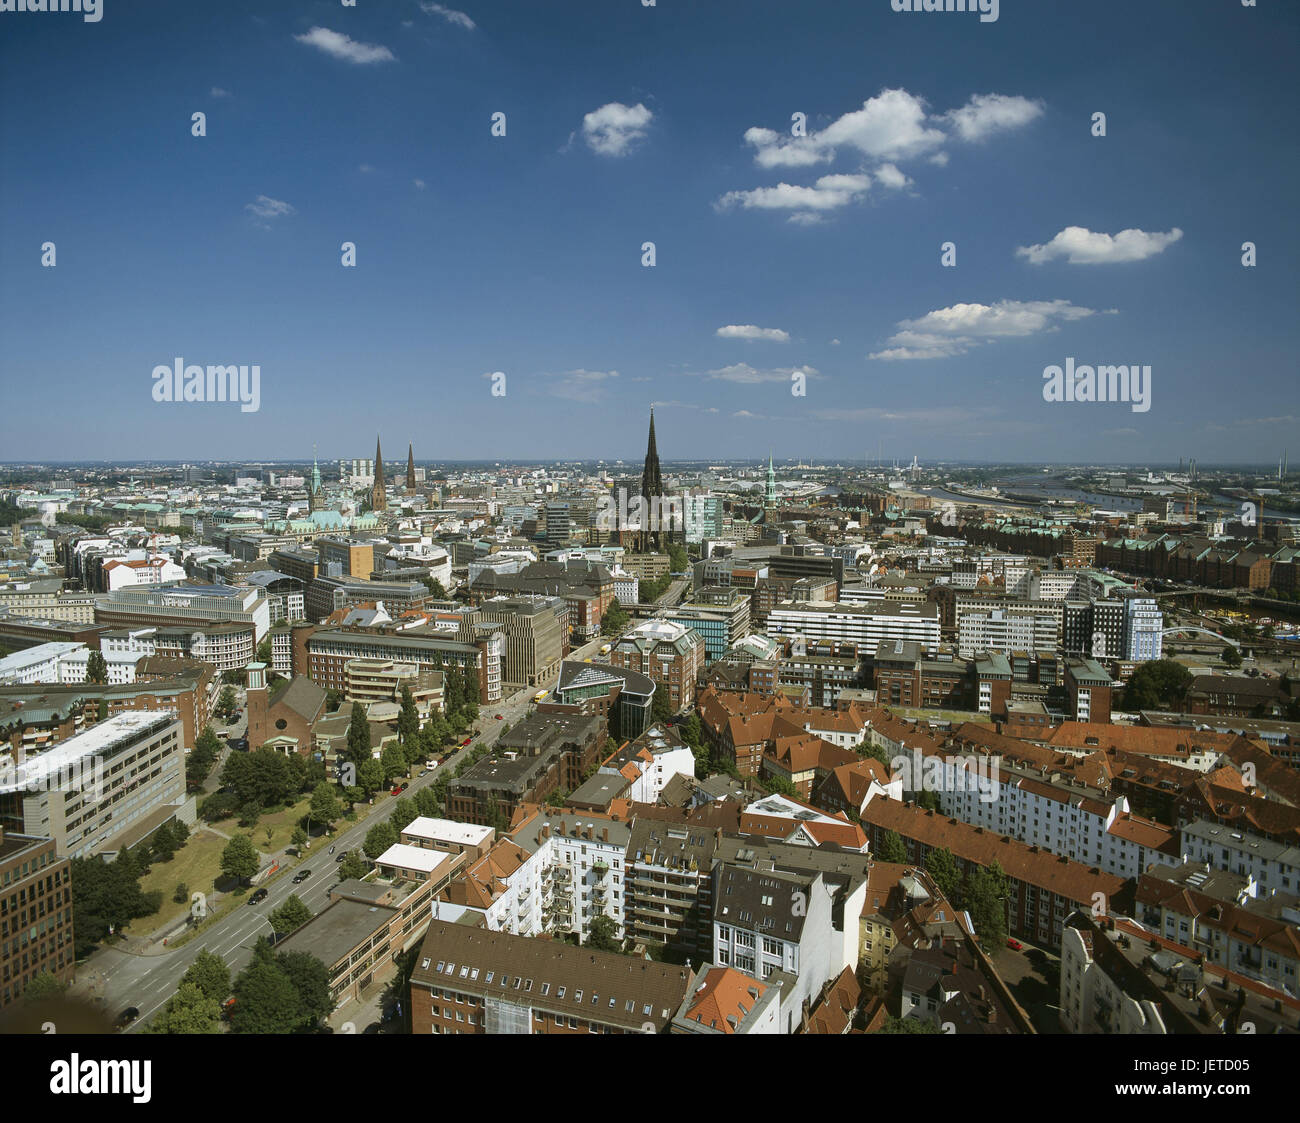 Germany, Hamburg, town overview, North Germany, city, Hanseatic town, port, town, city centre, churches, Ludwig's Erhard street, overview, Stock Photo